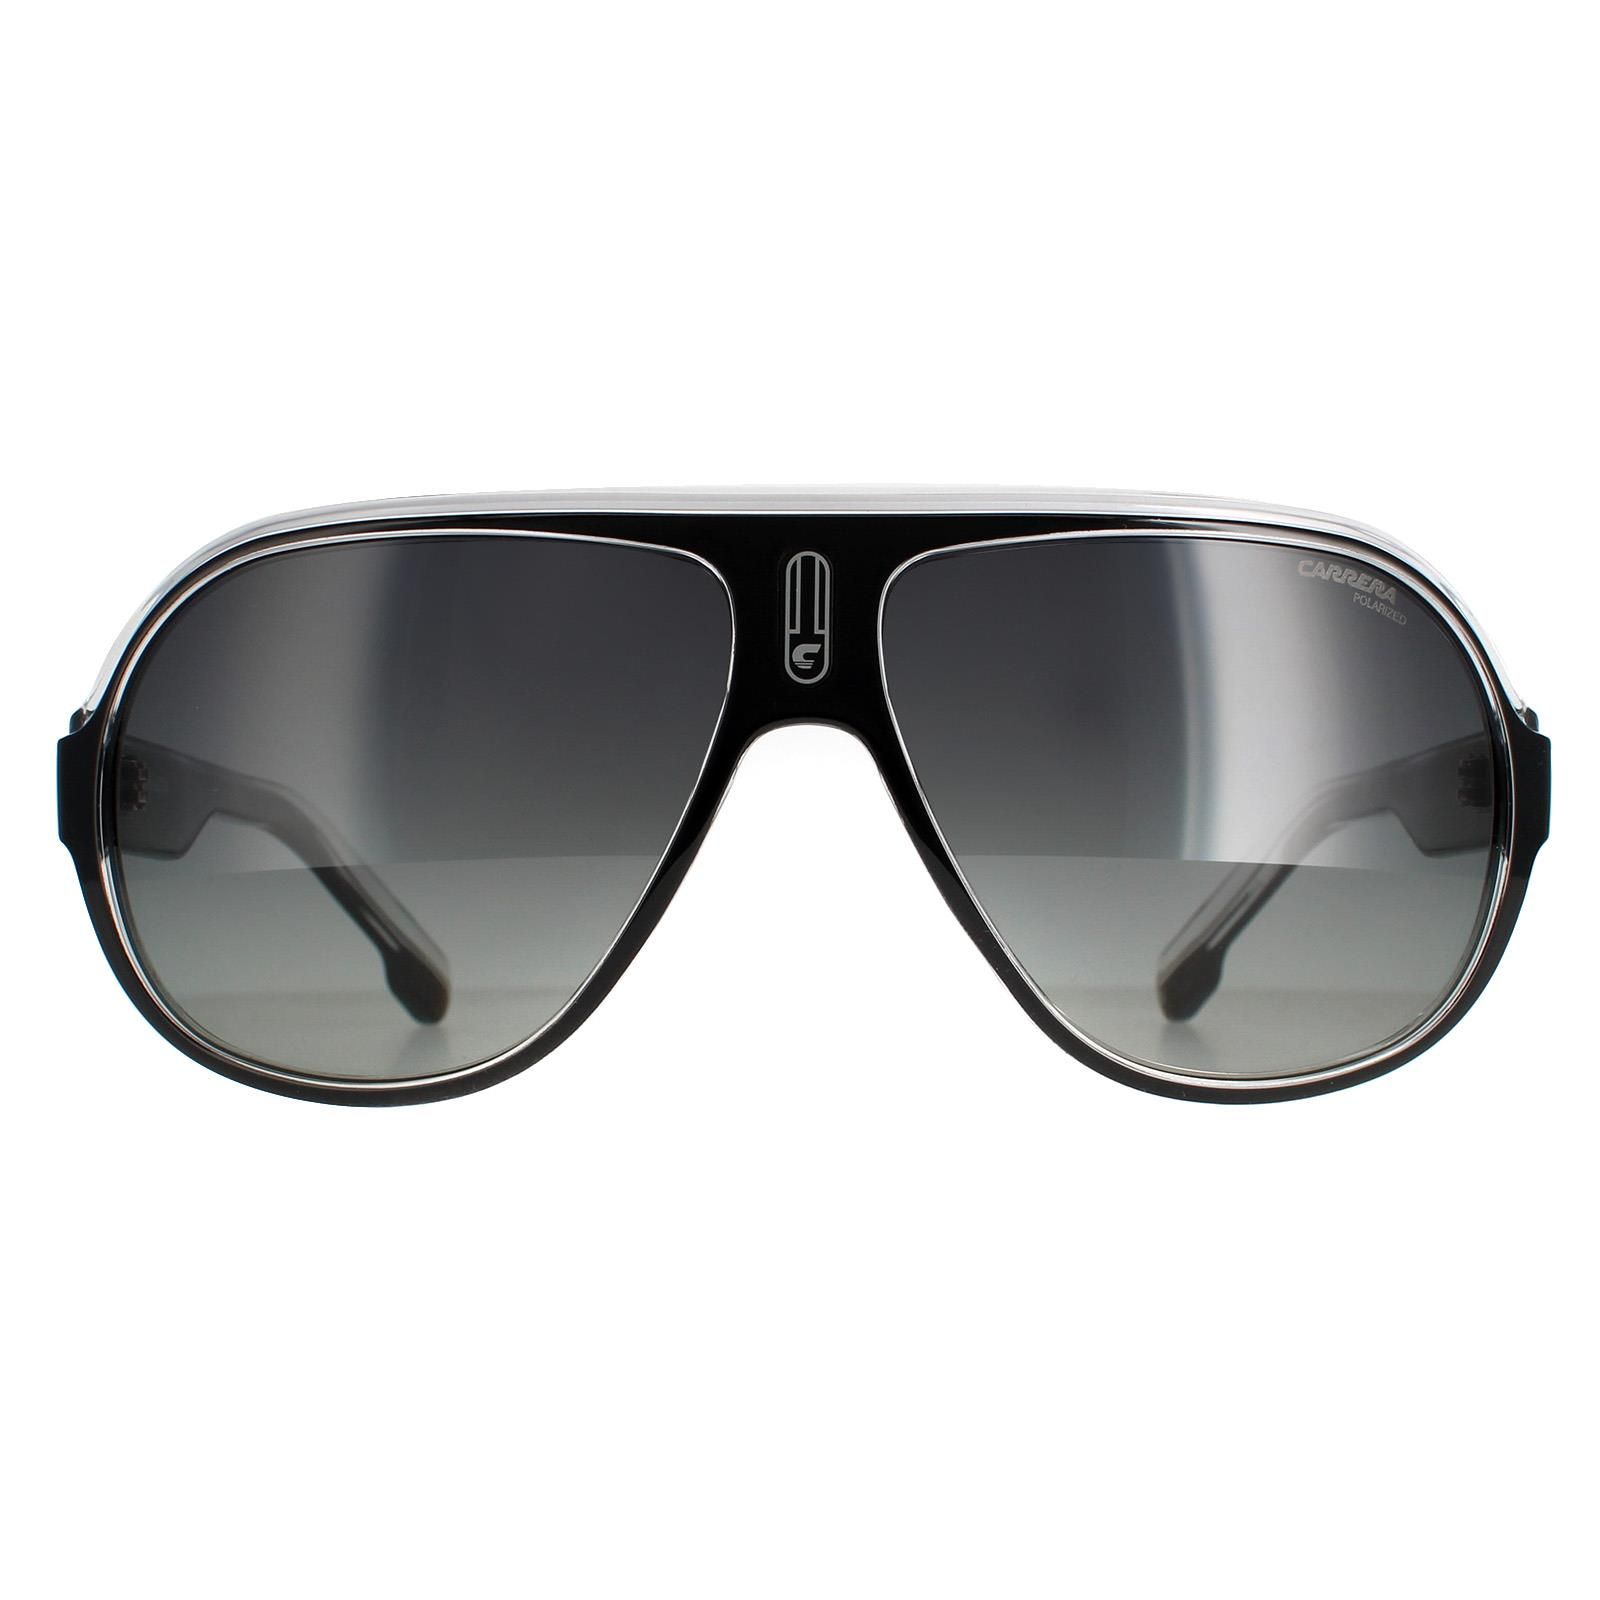 Carrera Aviator Unisex Black White Grey Gradient Polarized Speedway/N  Carrera are a new model in the Carrera sunglasses range in the classic aviator shape with a retro modern update in this chunky acetate frame